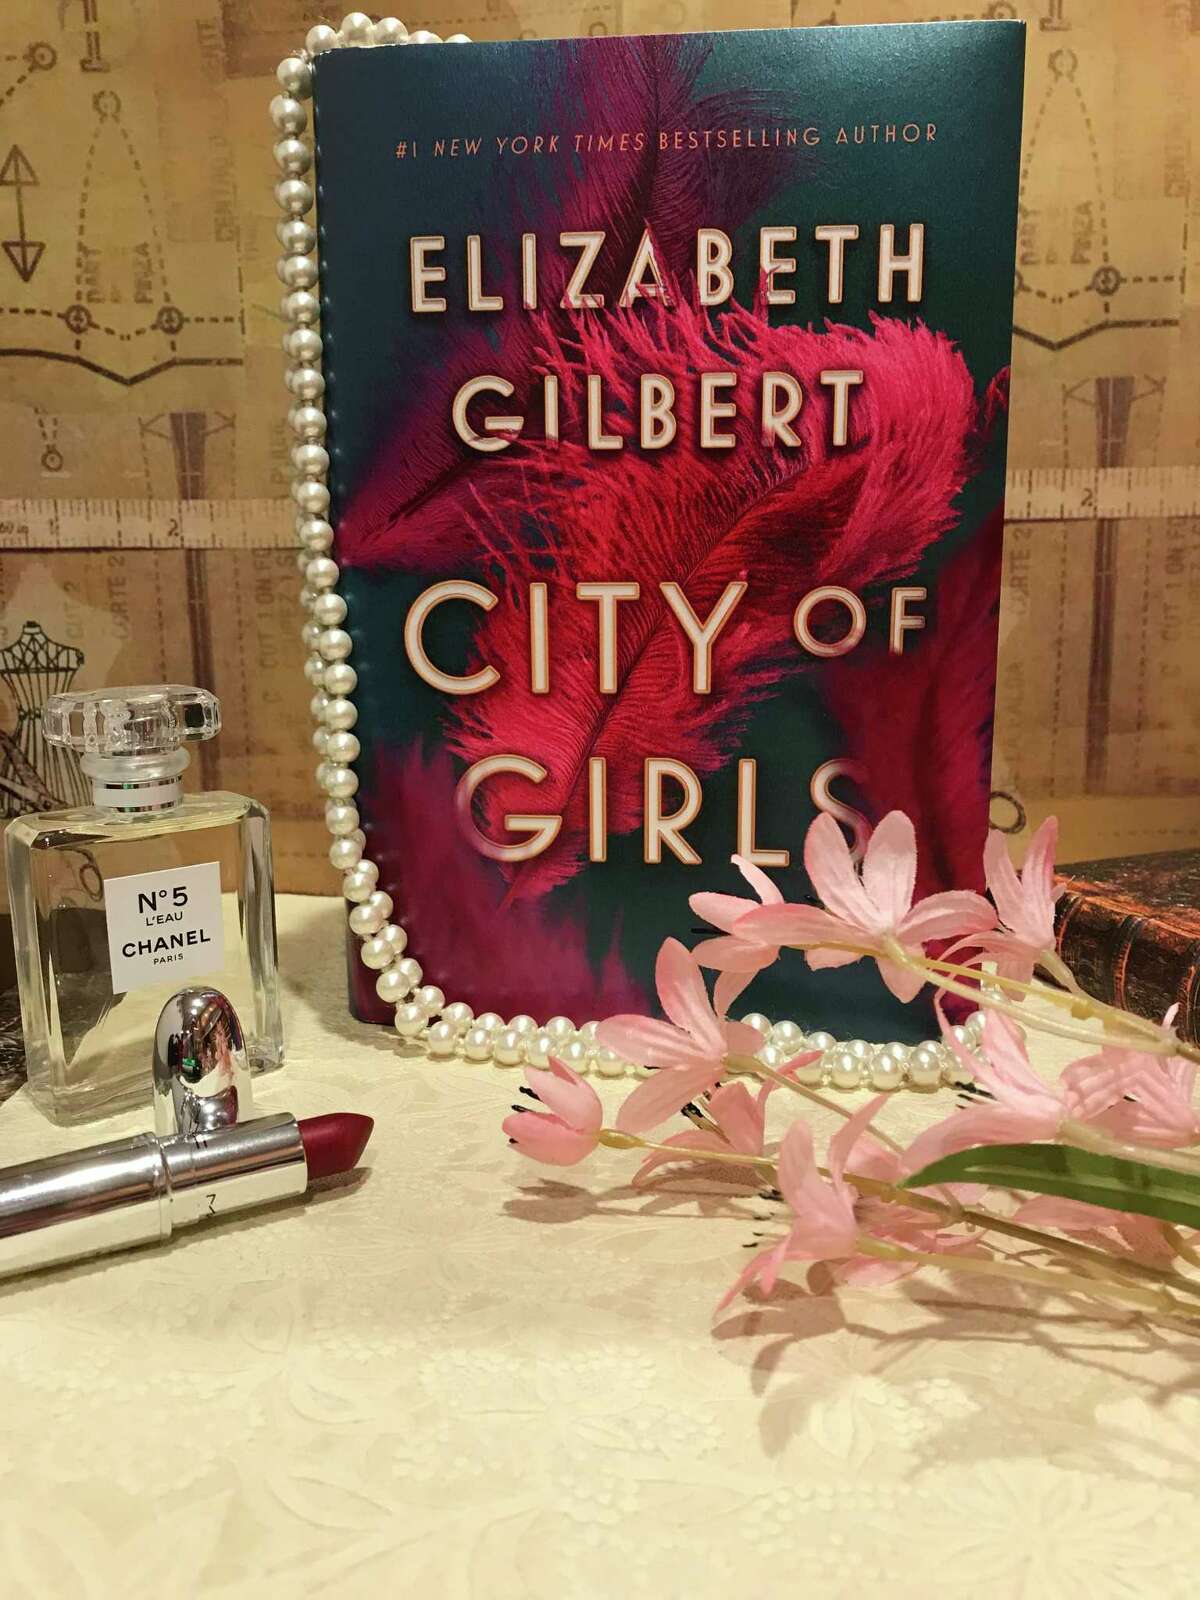 “City of Girls” by Elizabeth Gilbert was published on June 4.